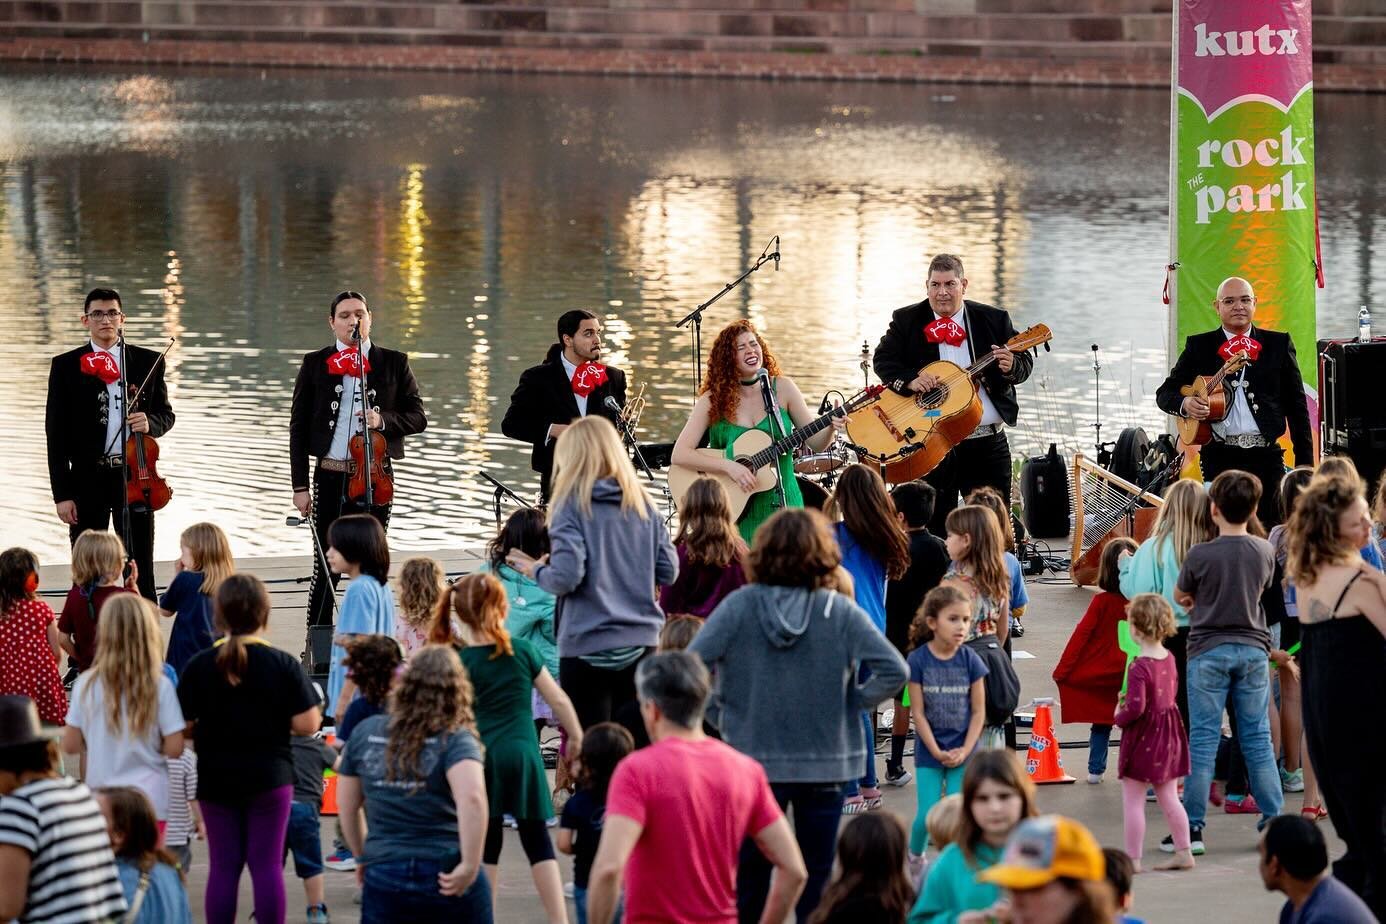 What a time we had at the first Rock the Park of the season! Thank you @kutx for the opportunity to connect with such a beautiful community of dancing kiddos and entire families at Mueller Lake Park! Thanks @renphotogs for the awesome shots 📸 

The 